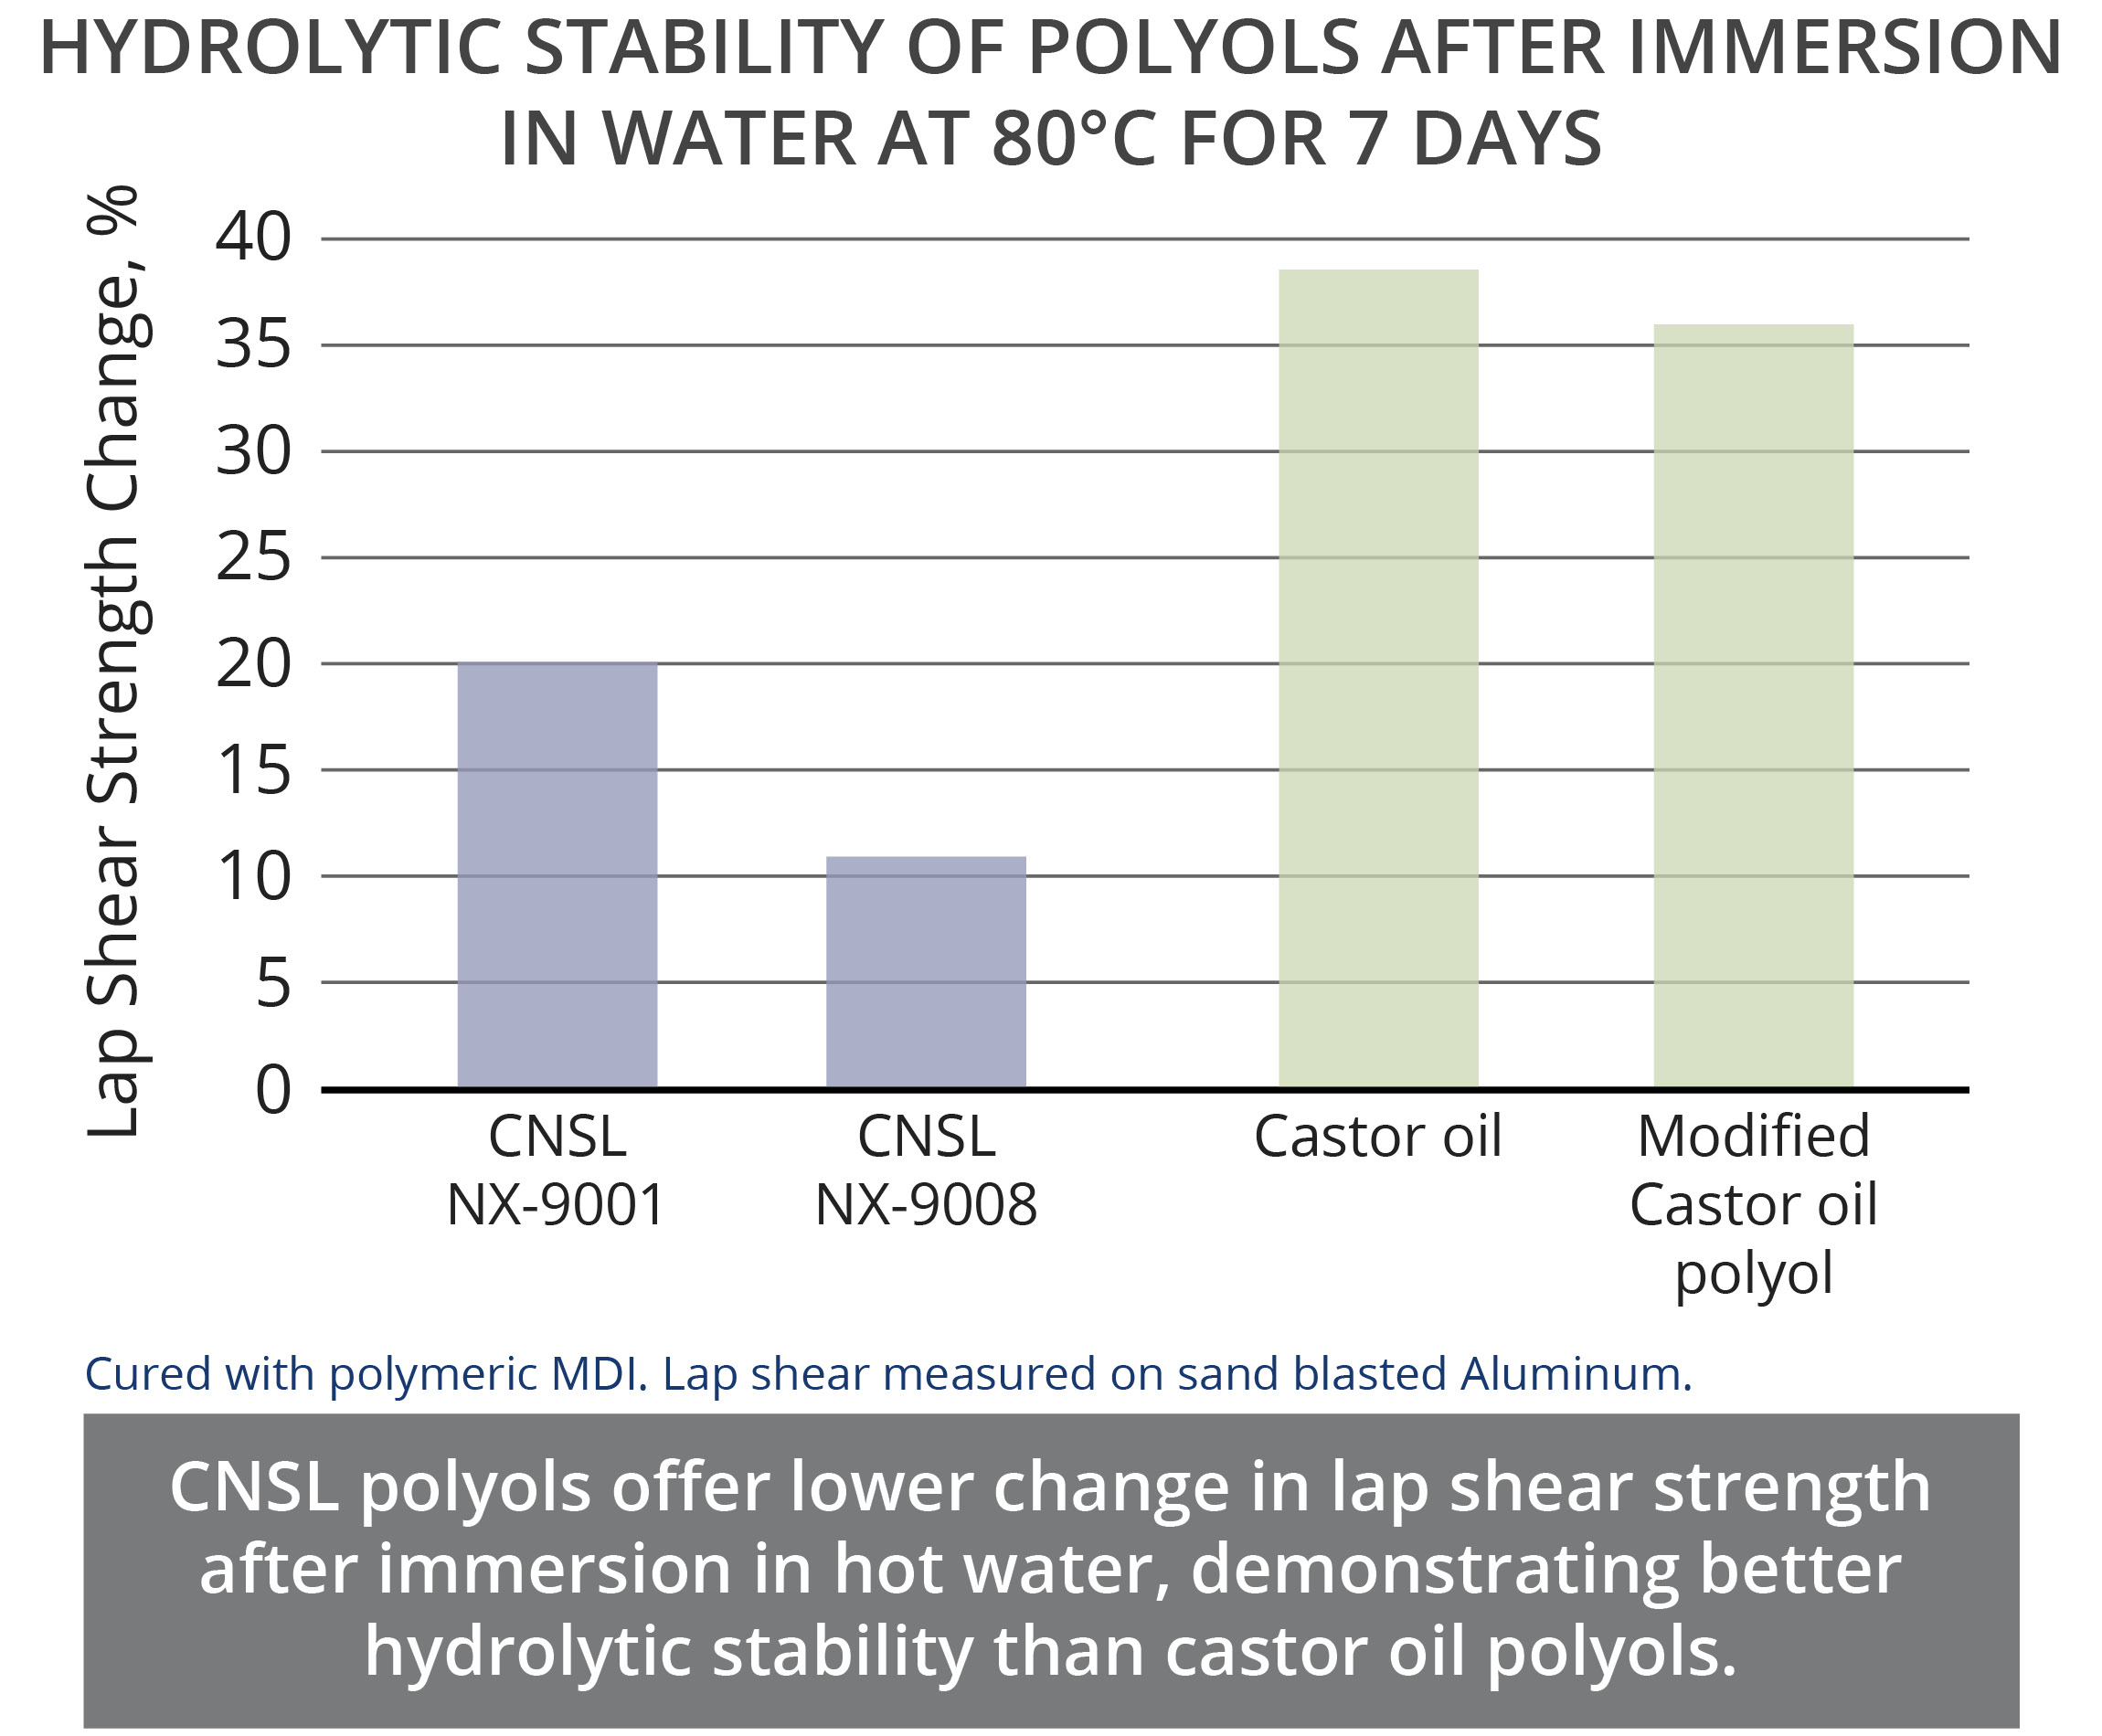 The hydrophobicity and aromaticity of CNSL lead to better hydrolytic stability polyols